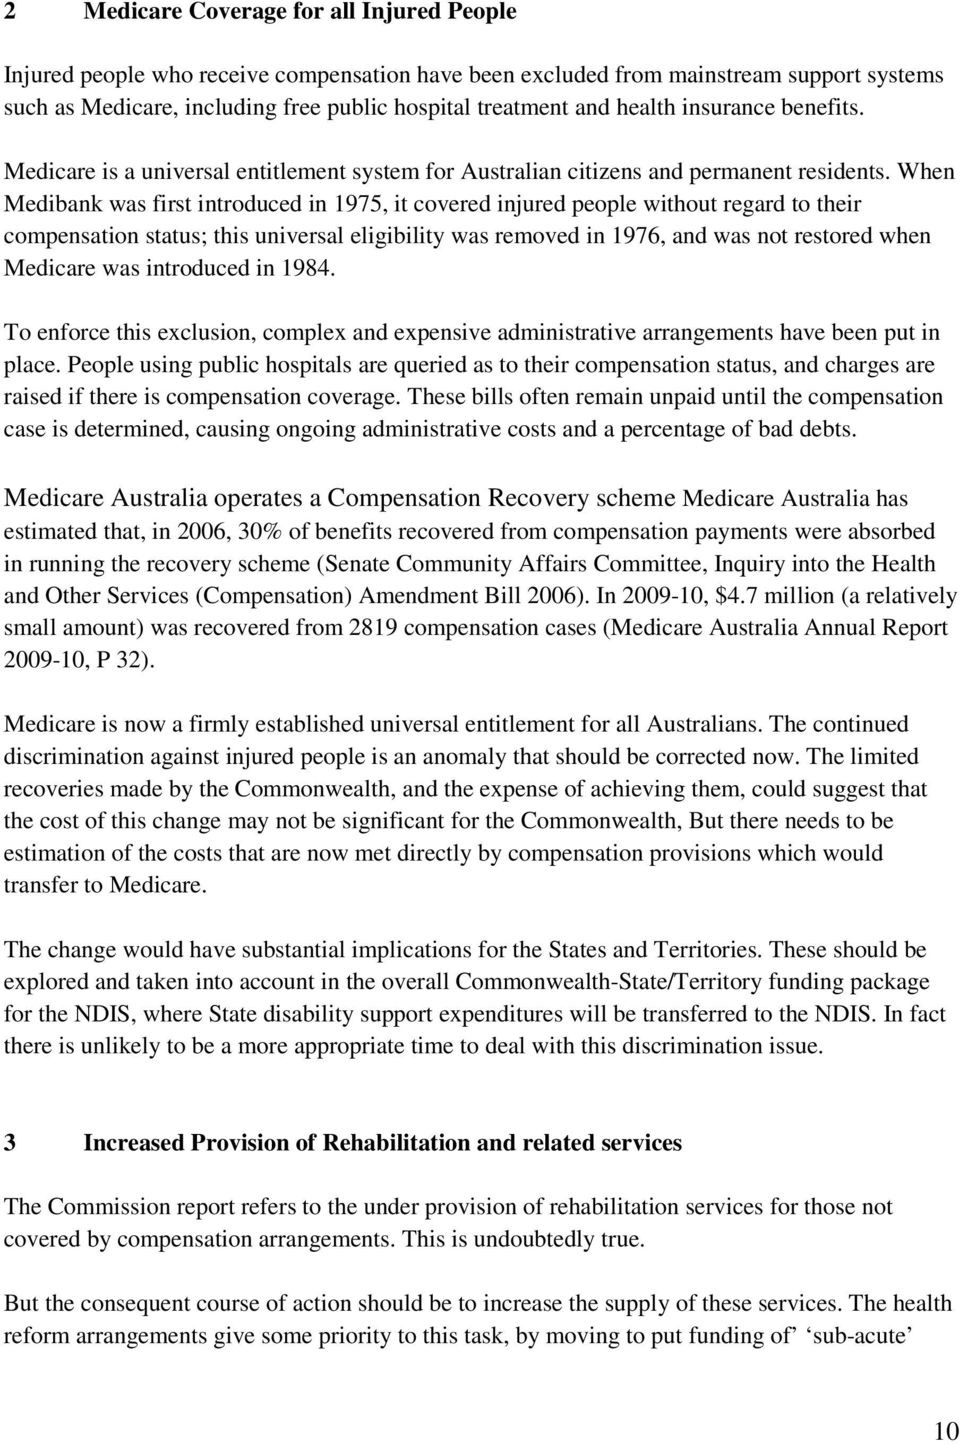 When Medibank was first introduced in 1975, it covered injured people without regard to their compensation status; this universal eligibility was removed in 1976, and was not restored when Medicare